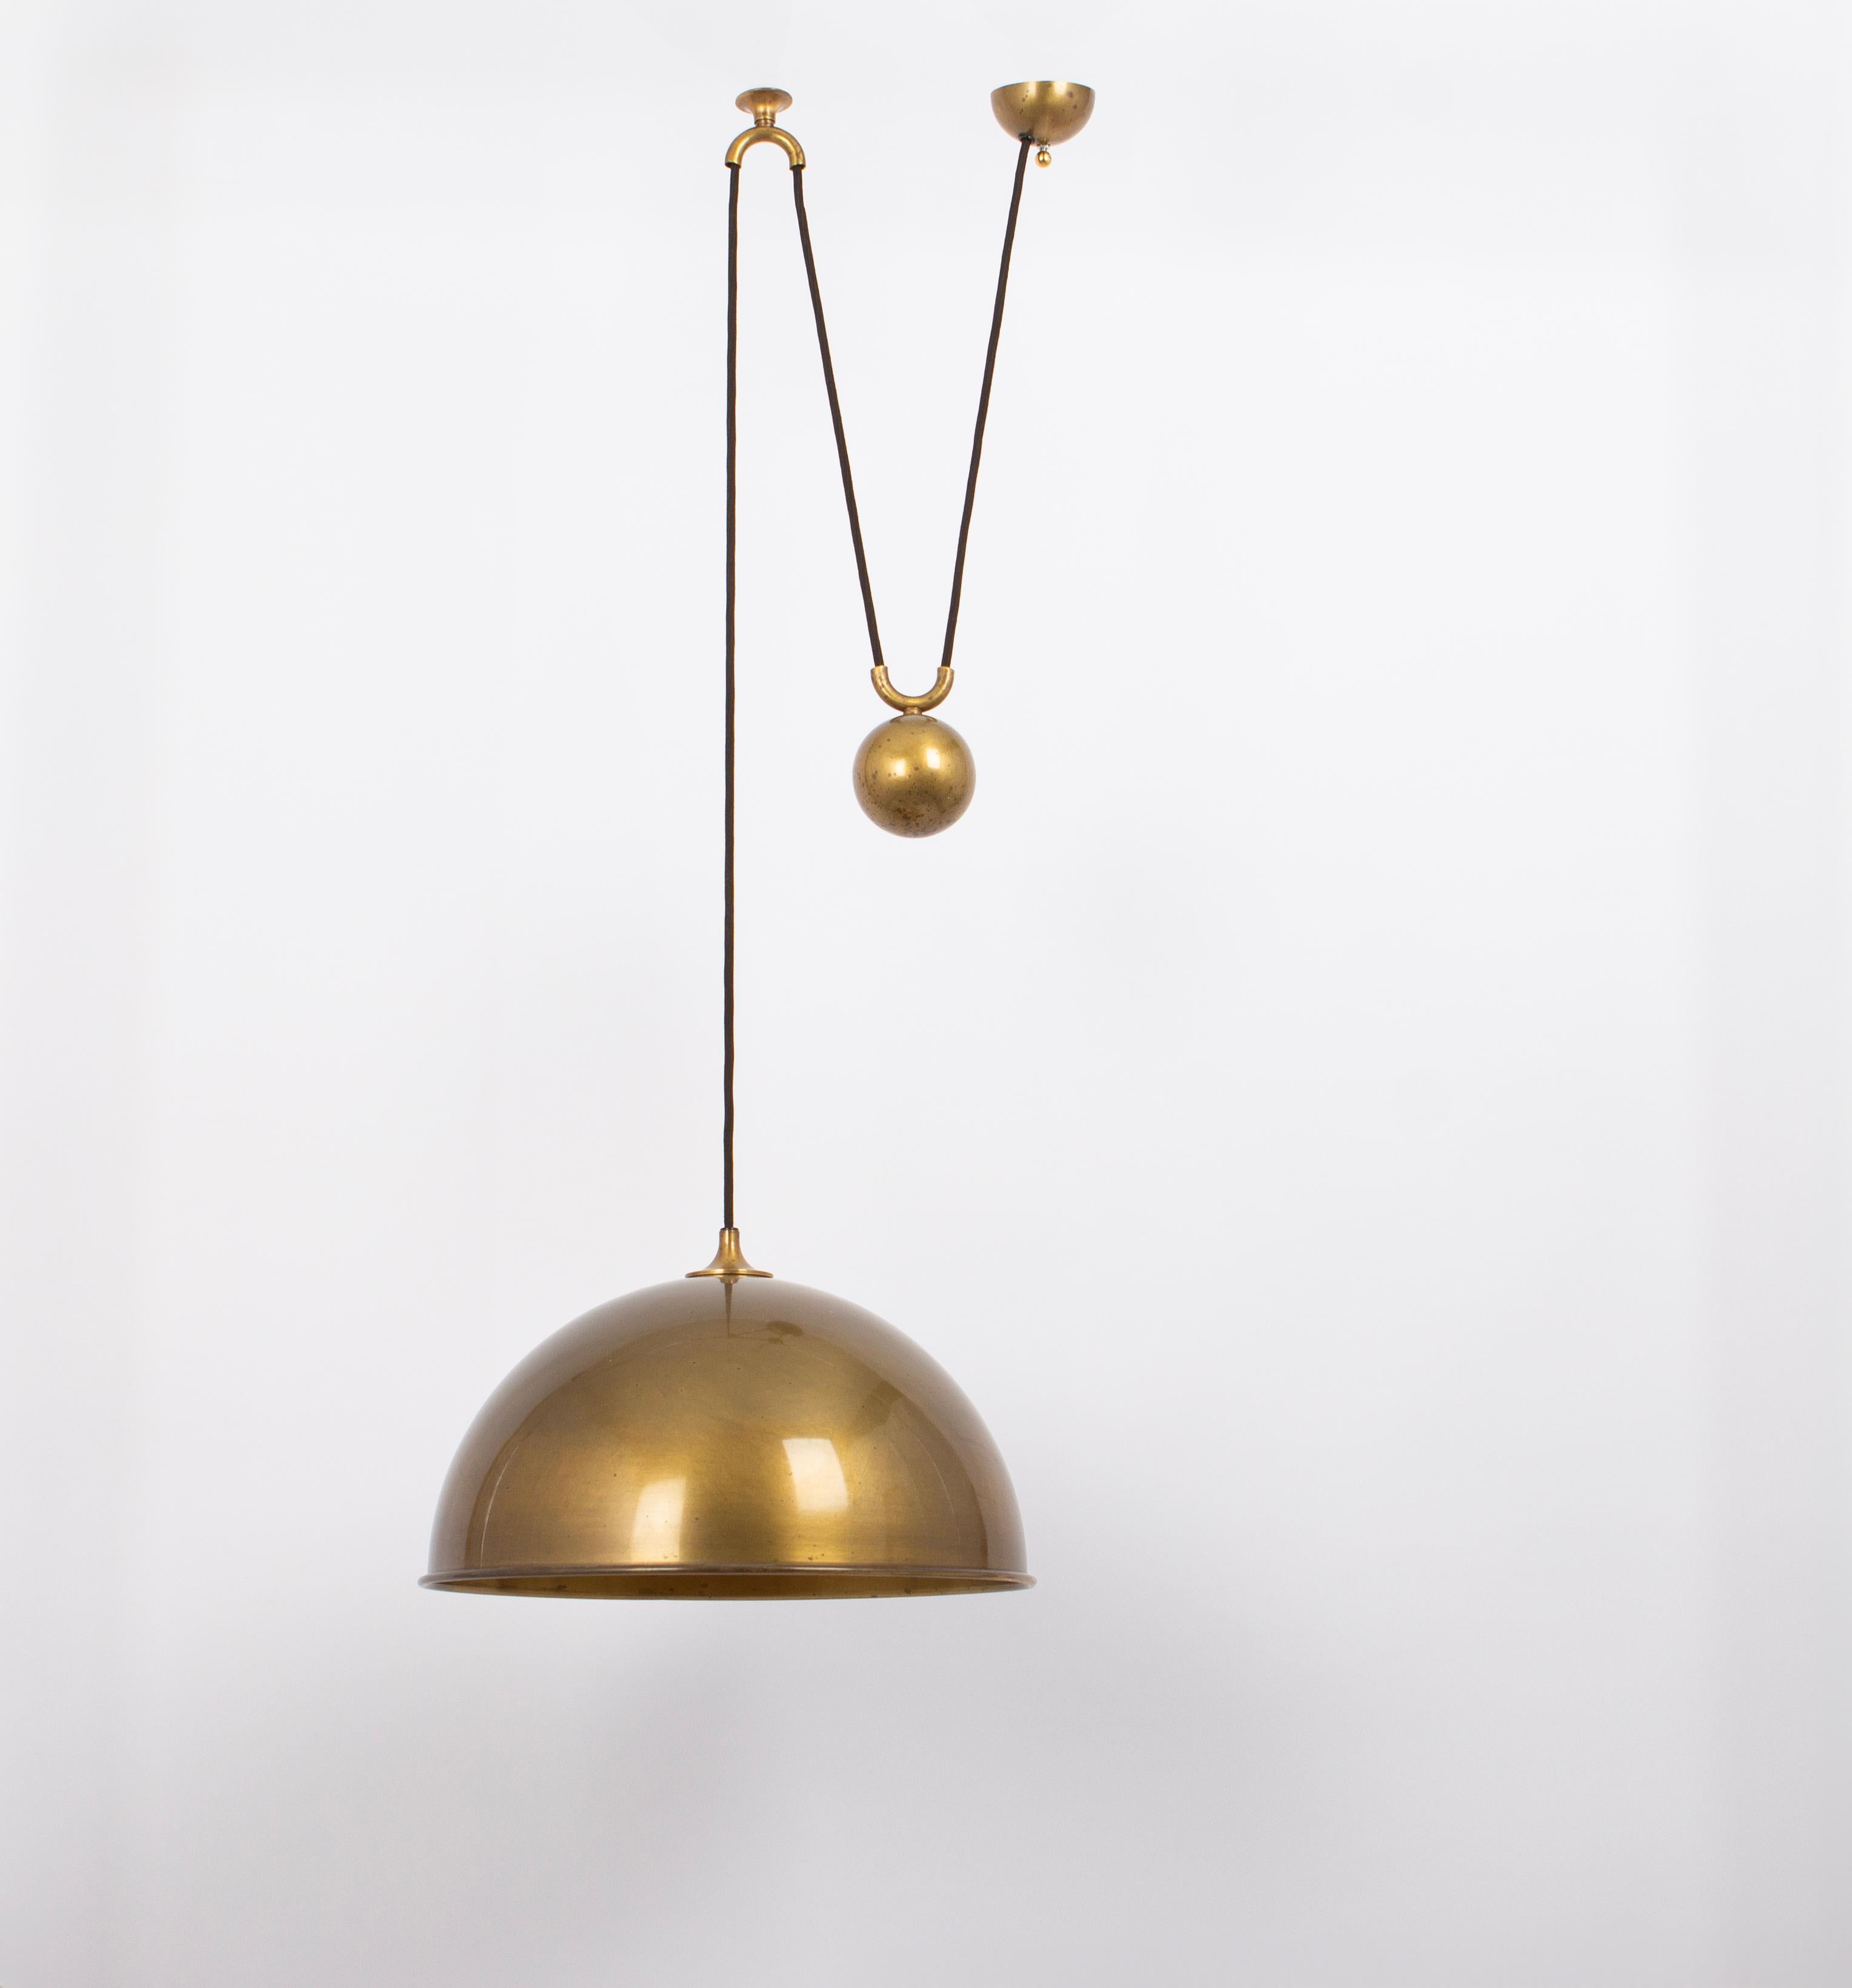 Stunning Posa brass pendant with adjustable counterweight designed by Florian Schulz, Germany, 1970s

It is a masterpiece of design and craftsmanship. It seamlessly blends functionality and aesthetics to create a lighting fixture that's as much an